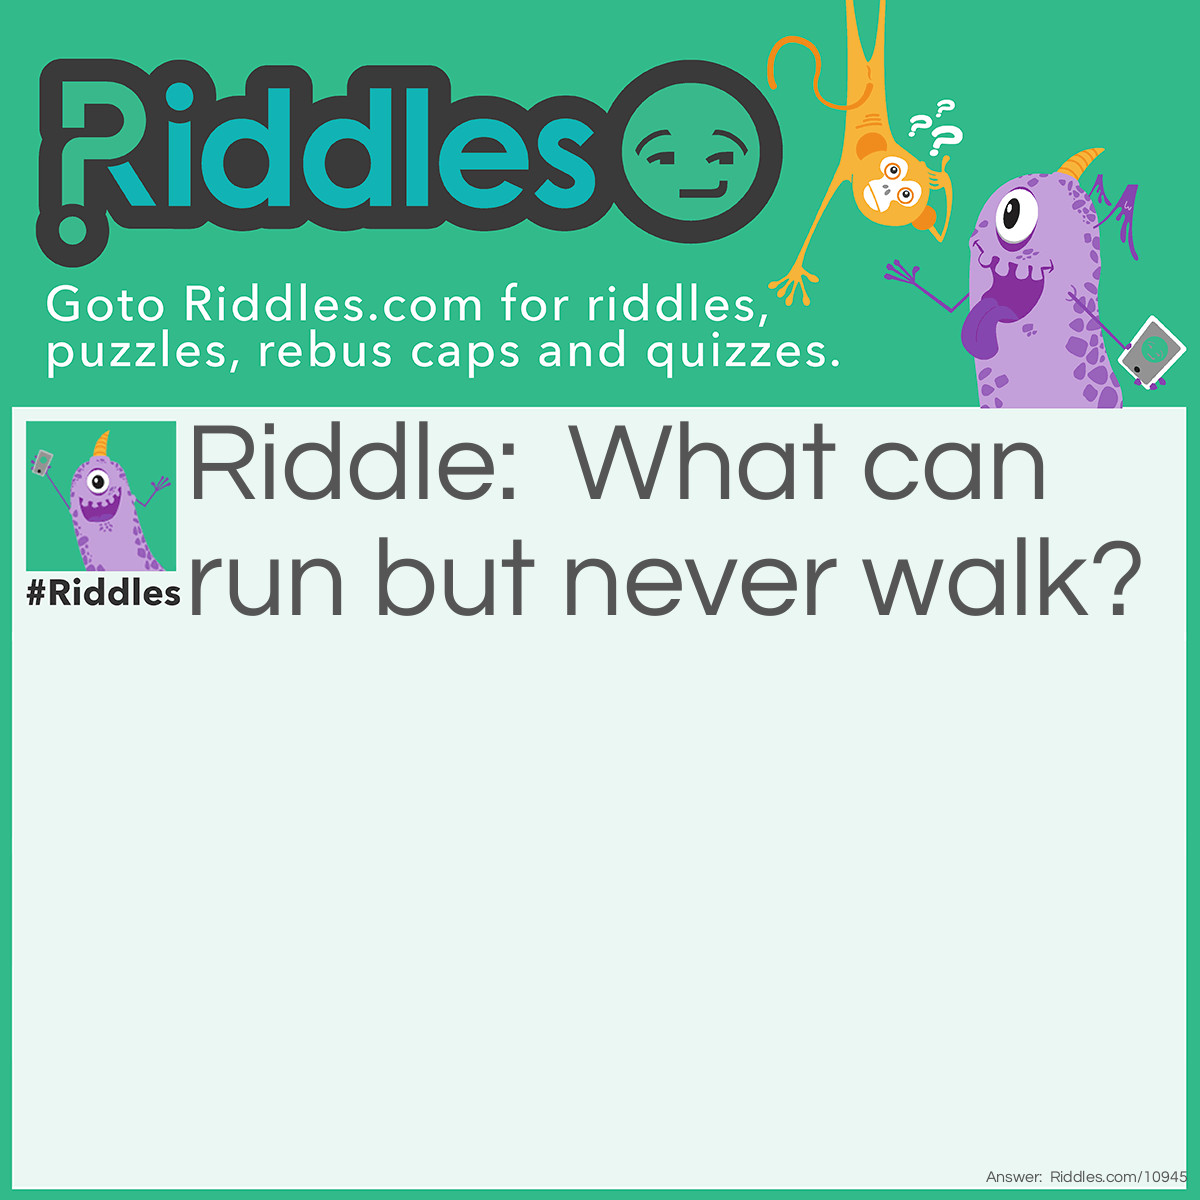 Riddle: What can run but never walk? Answer: A River